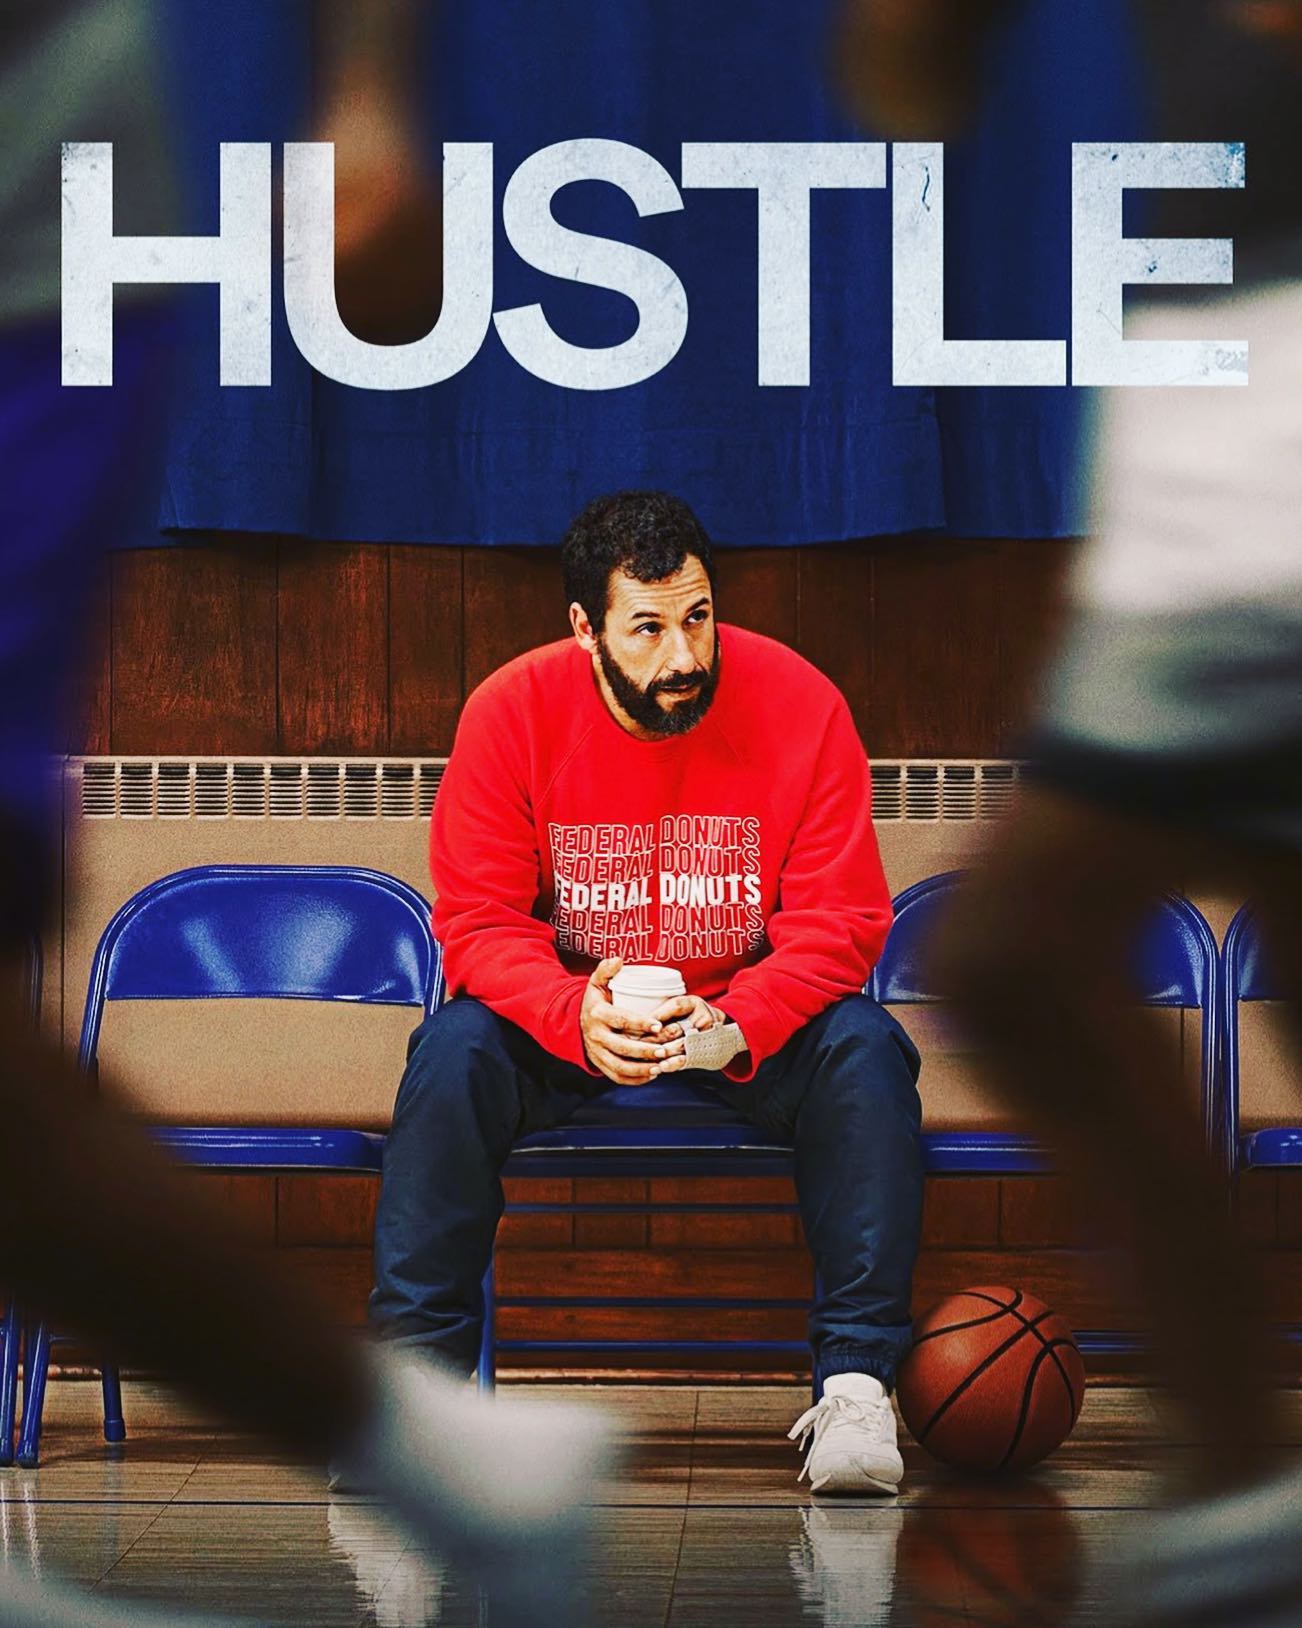 Thank you @adamsandler and @queenlatifah for the perfect mother/daughter Sunday night movie!
-
-
-
-
-
#adamsandler #queenlatifah #nba #hustle #hustlemovie